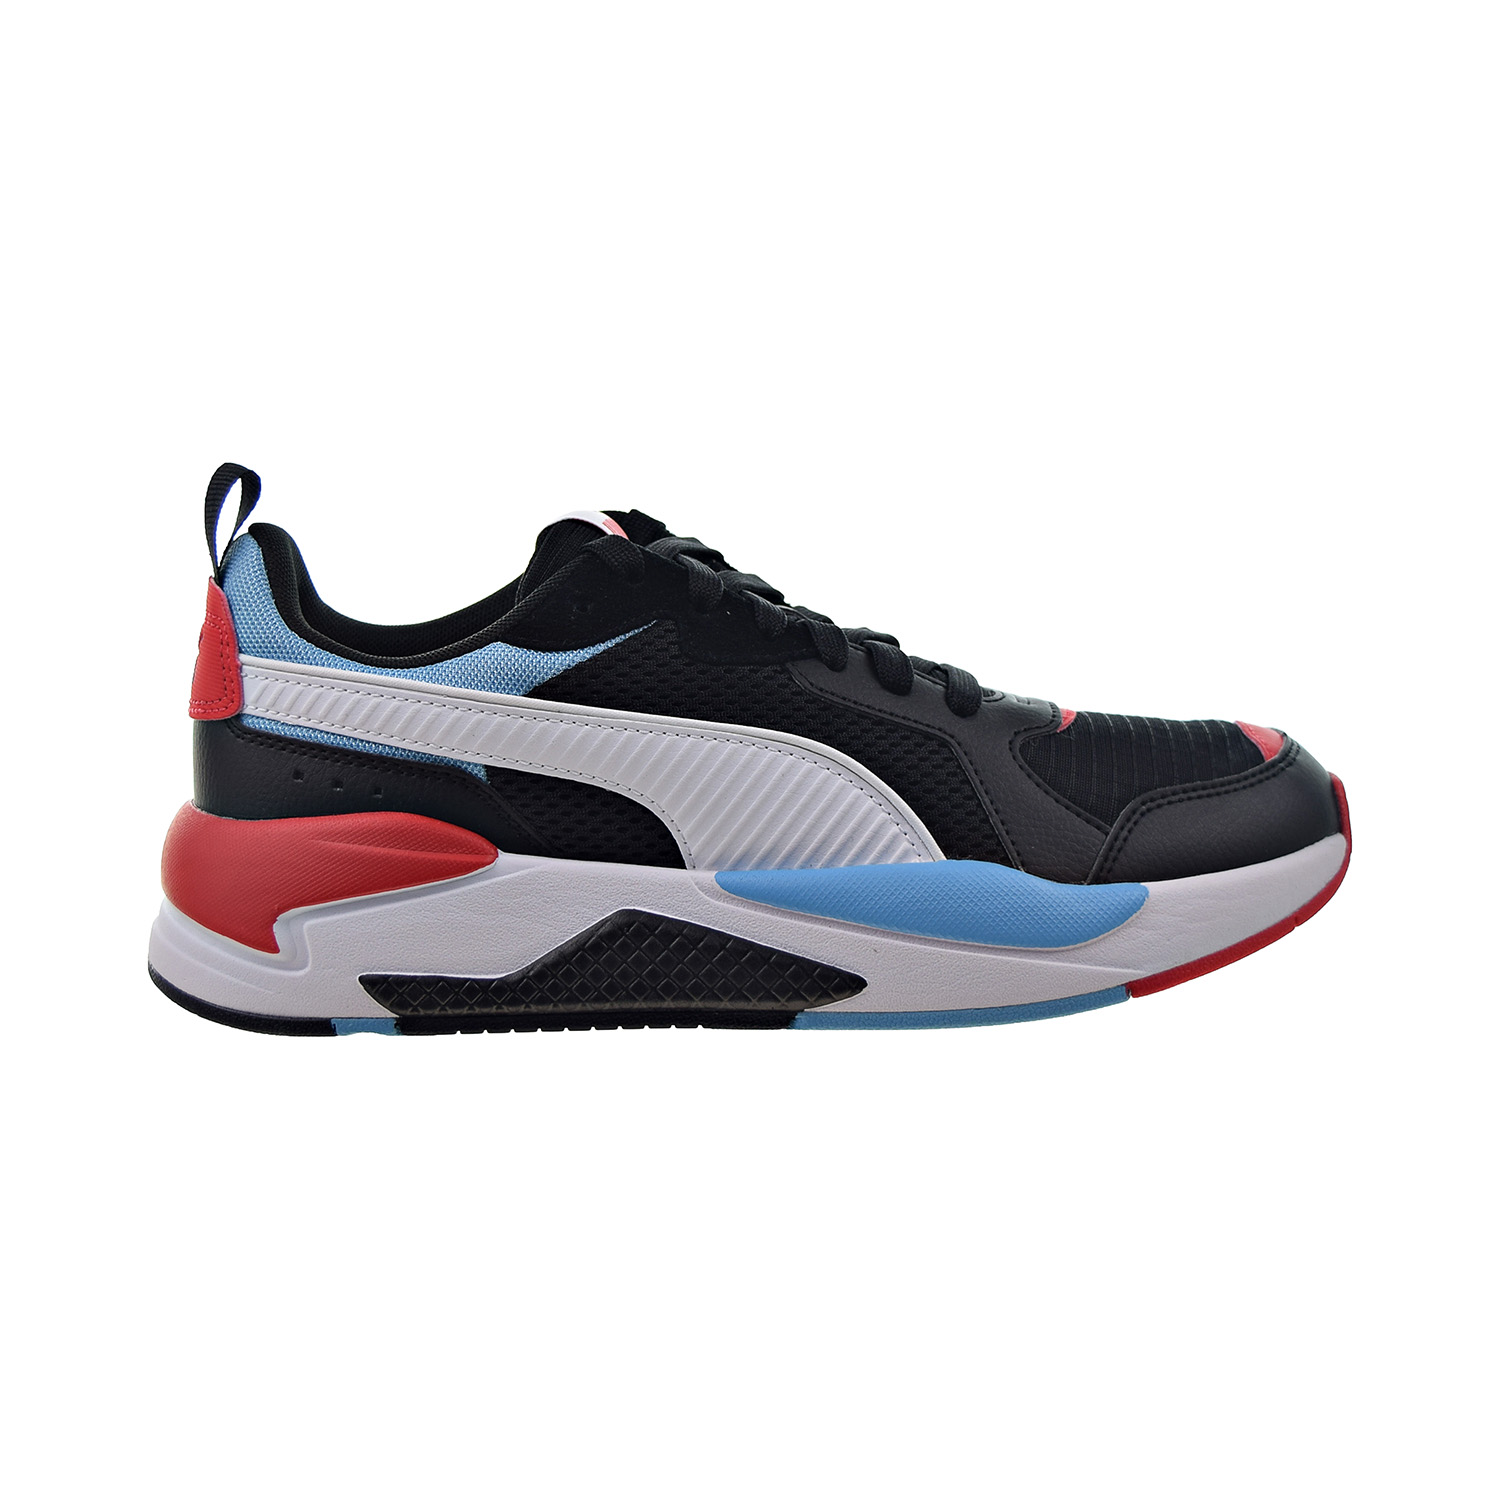 Puma X-Ray Color Block Men's Shoes Black-White-Blue-Red 373582-01 - image 1 of 6